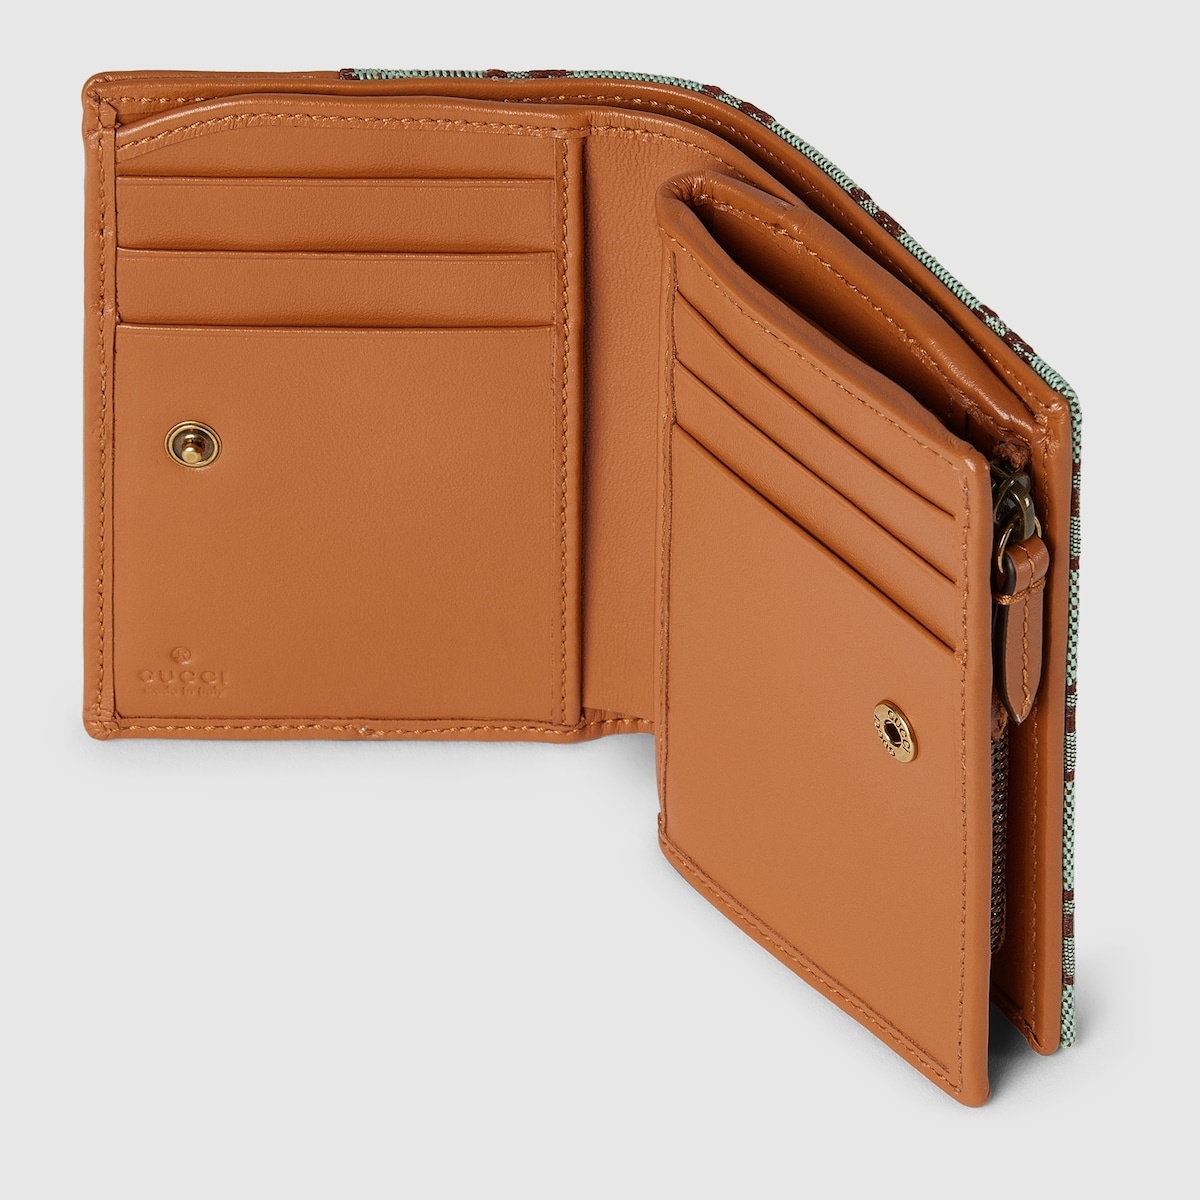 GG wallet with coin pocket - 5